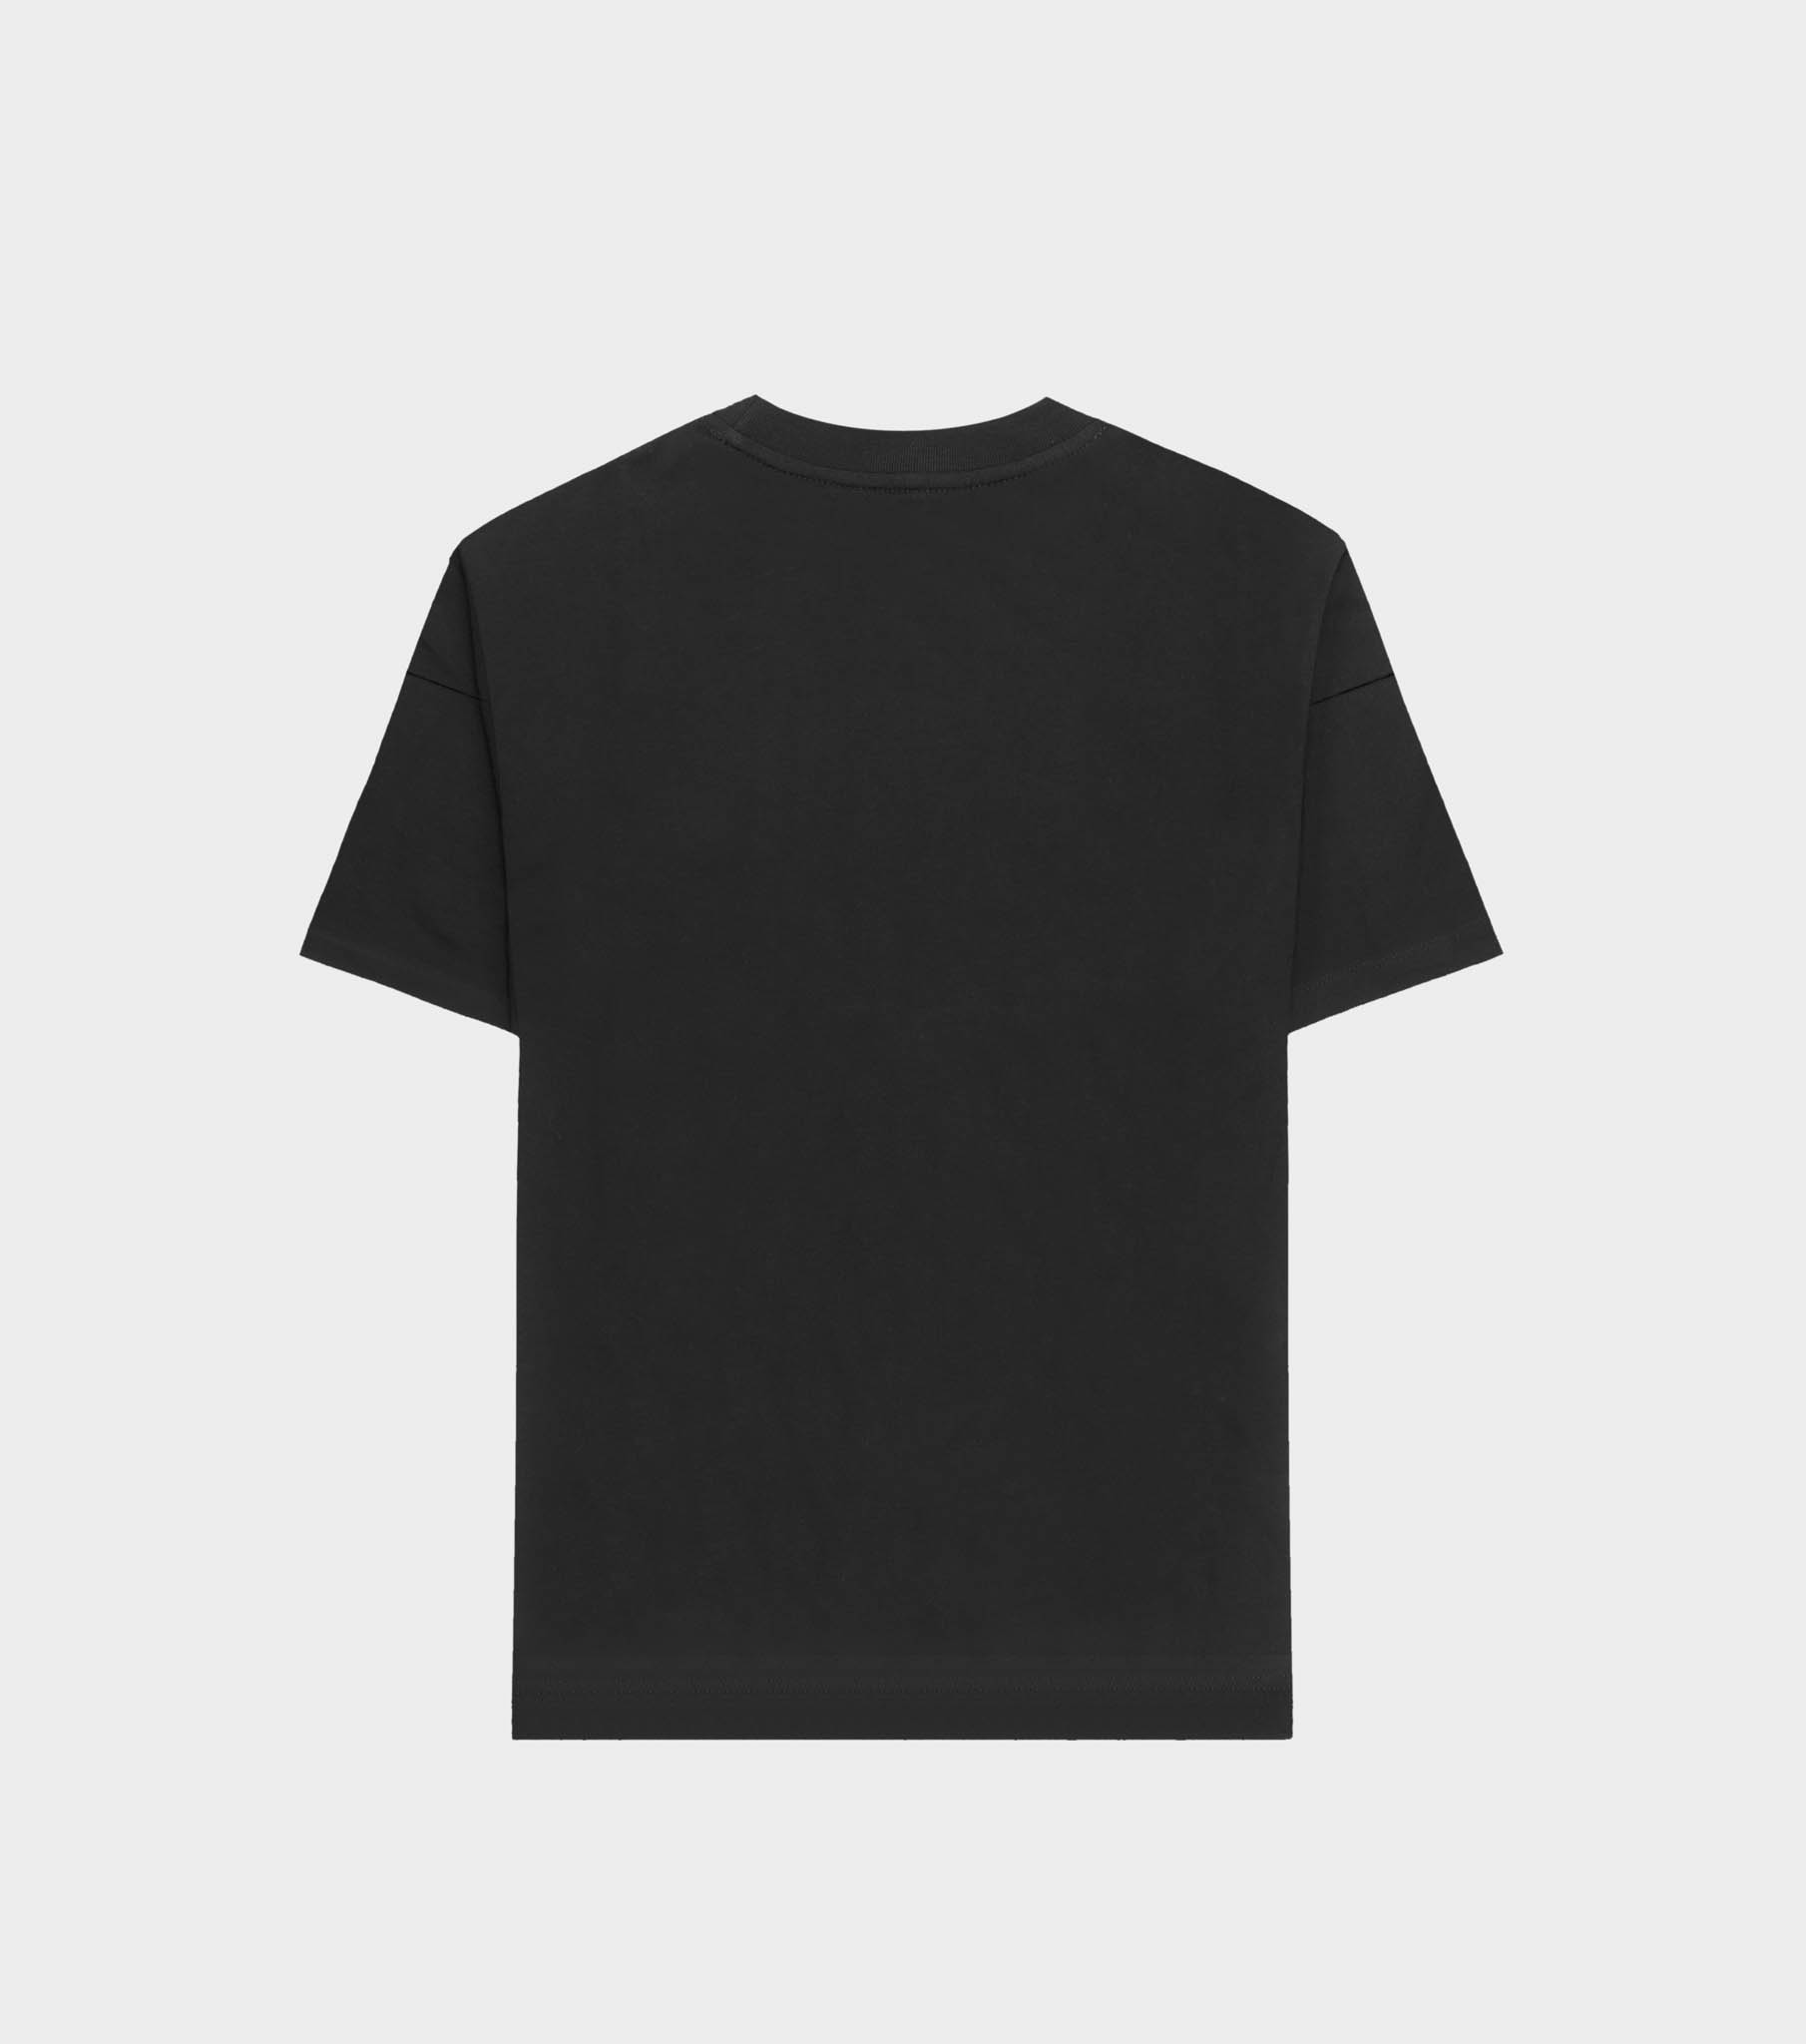 Relaxed fit short sleeve cotton T-shirt - Studio · Black, White, Dark Blue  · T-shirts And Polo Shirts